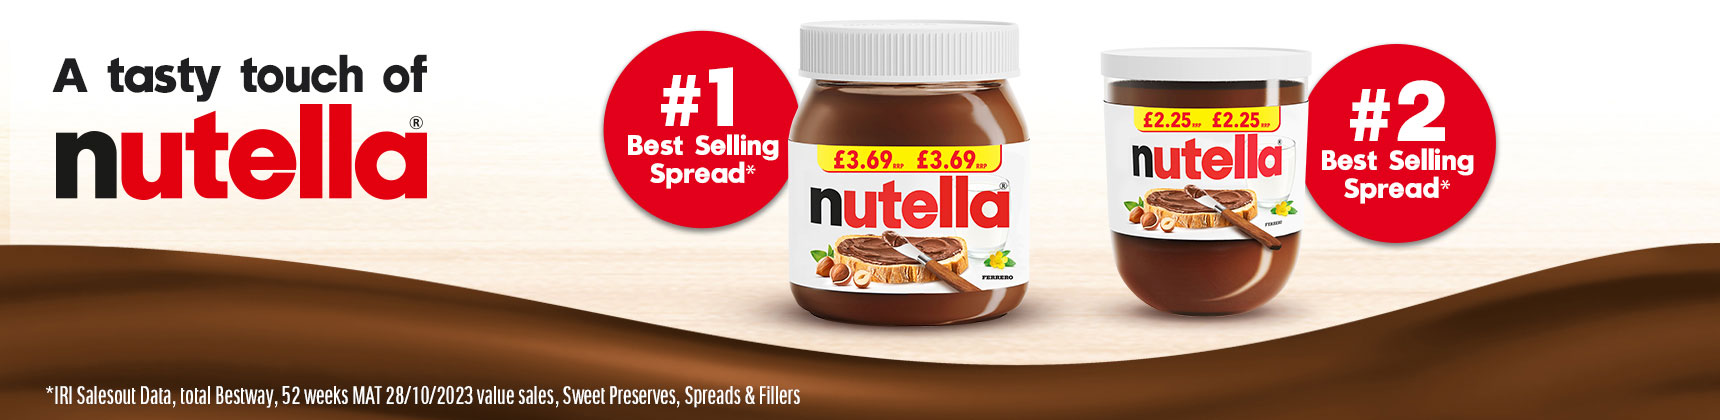 A tasty touch of Nutella